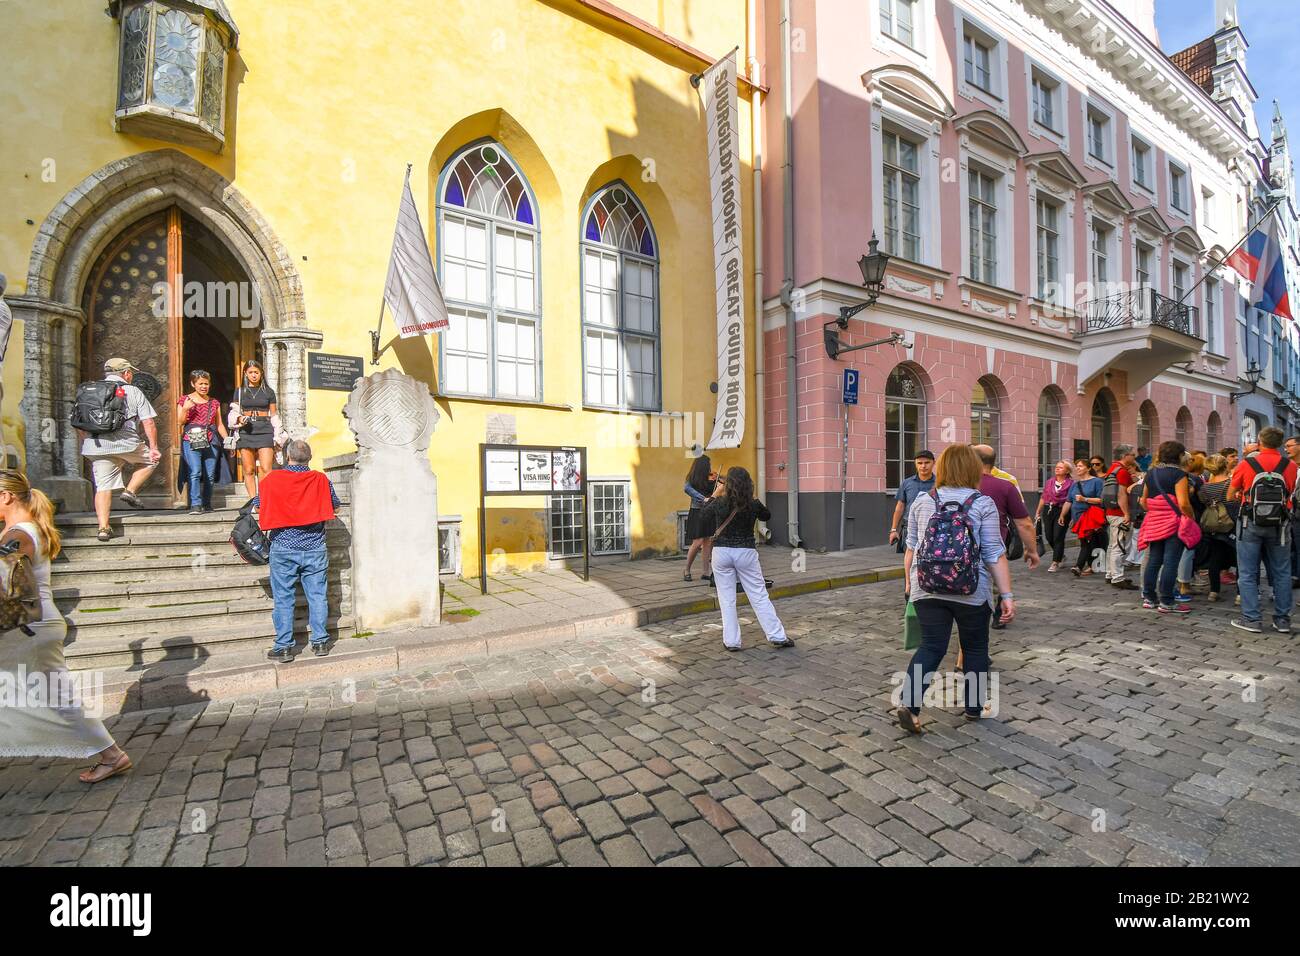 Tourists gather near a street musician performer playing violin in the Old Town center of Medieval Tallinn Estonia. Stock Photo